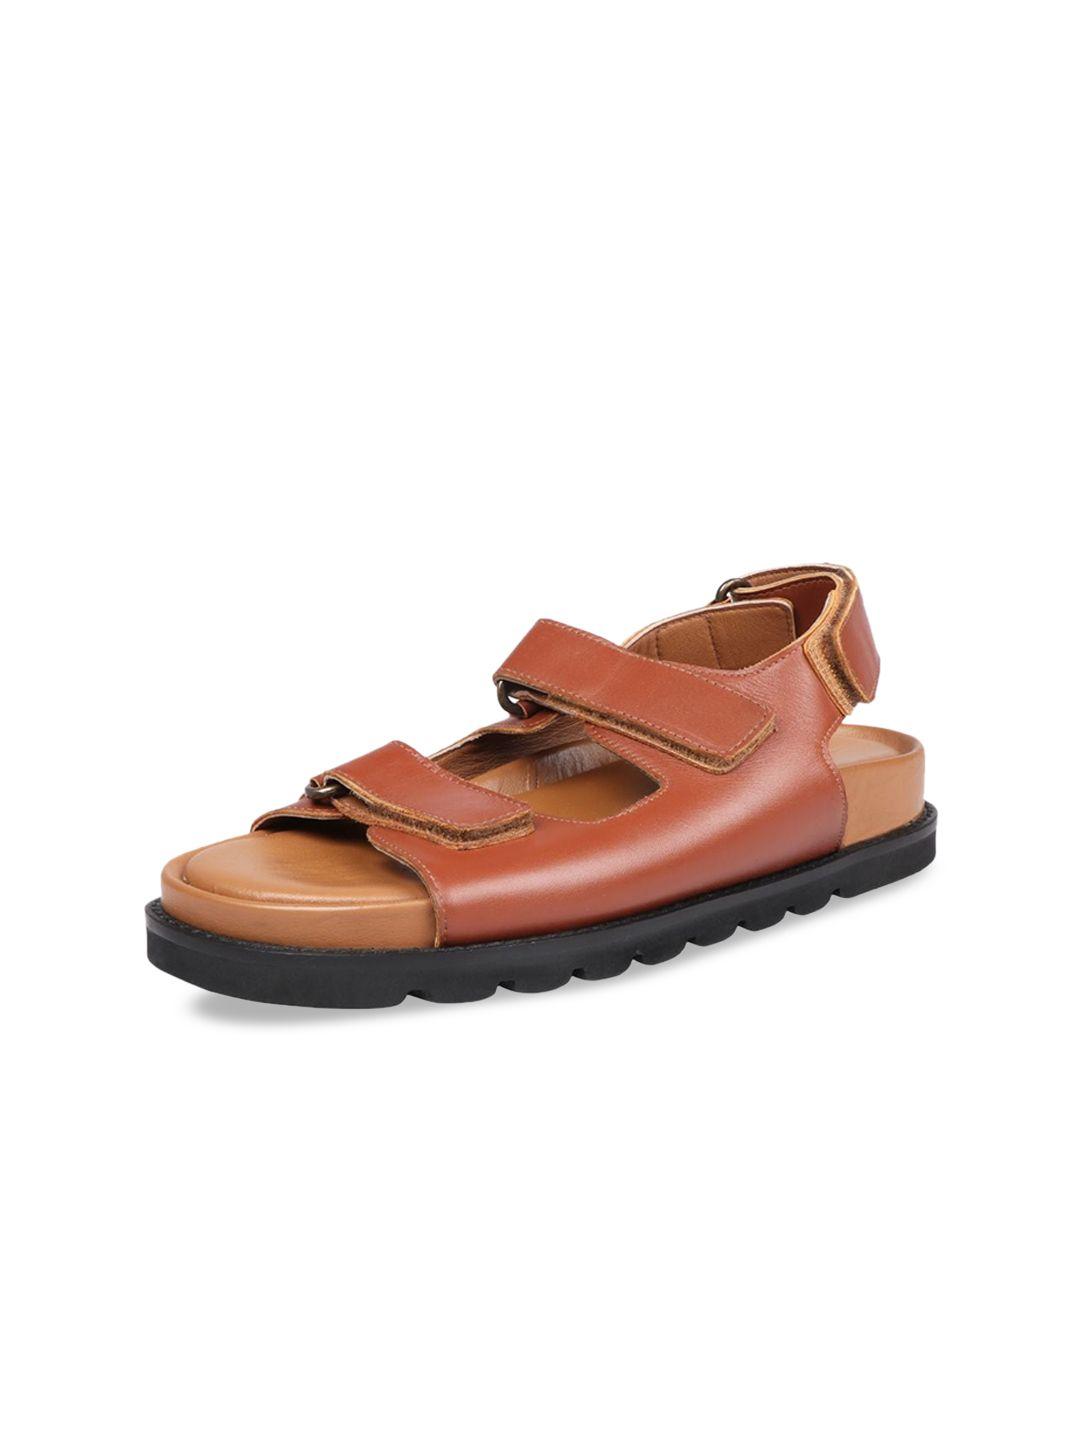 hidesign leather open toe flats with backstrap